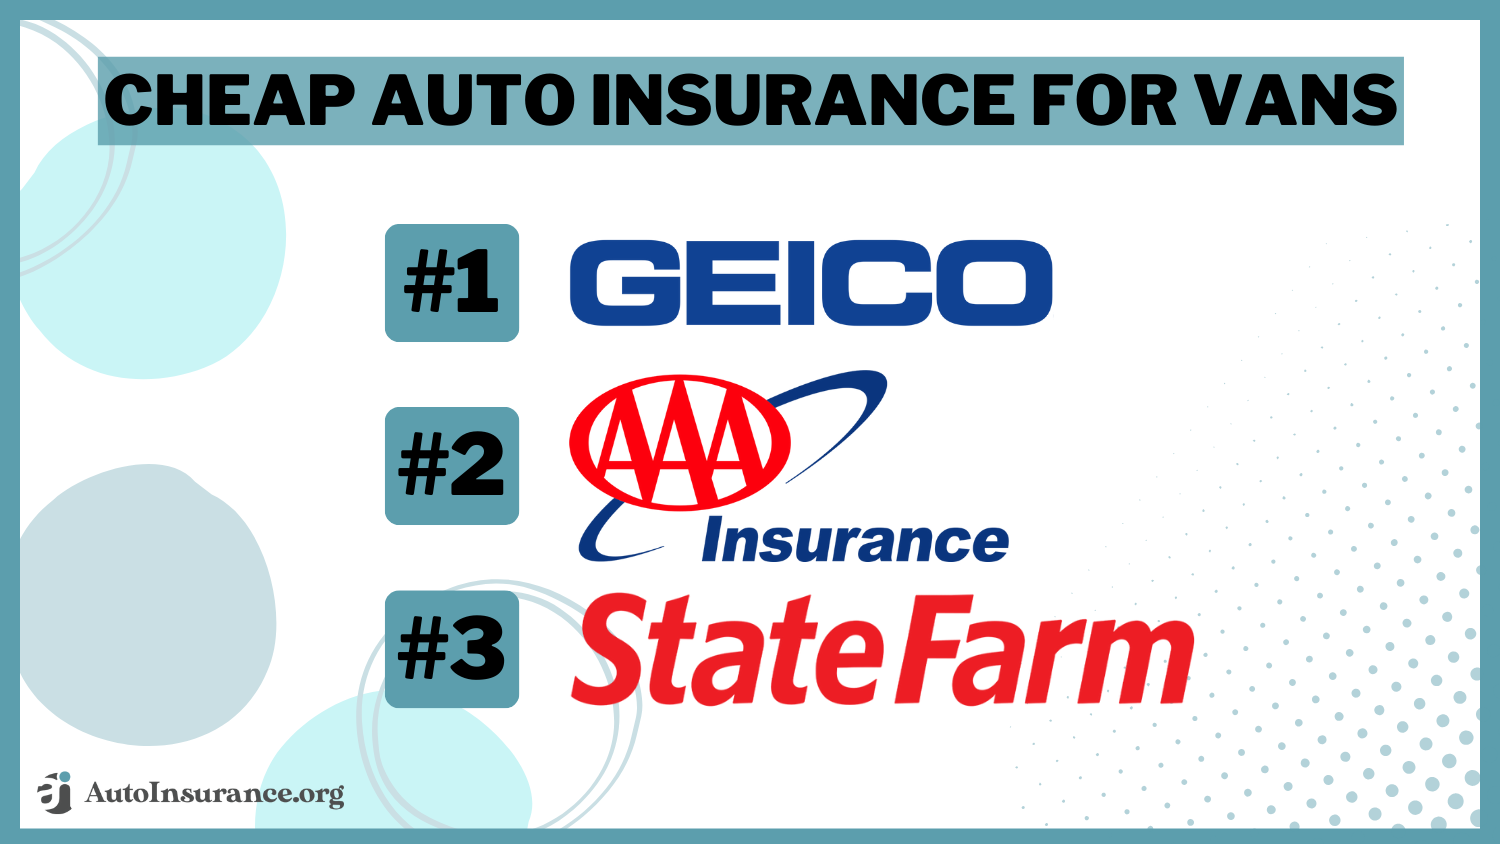 cheap auto insurance for vans: Geico, AAA, State Farm